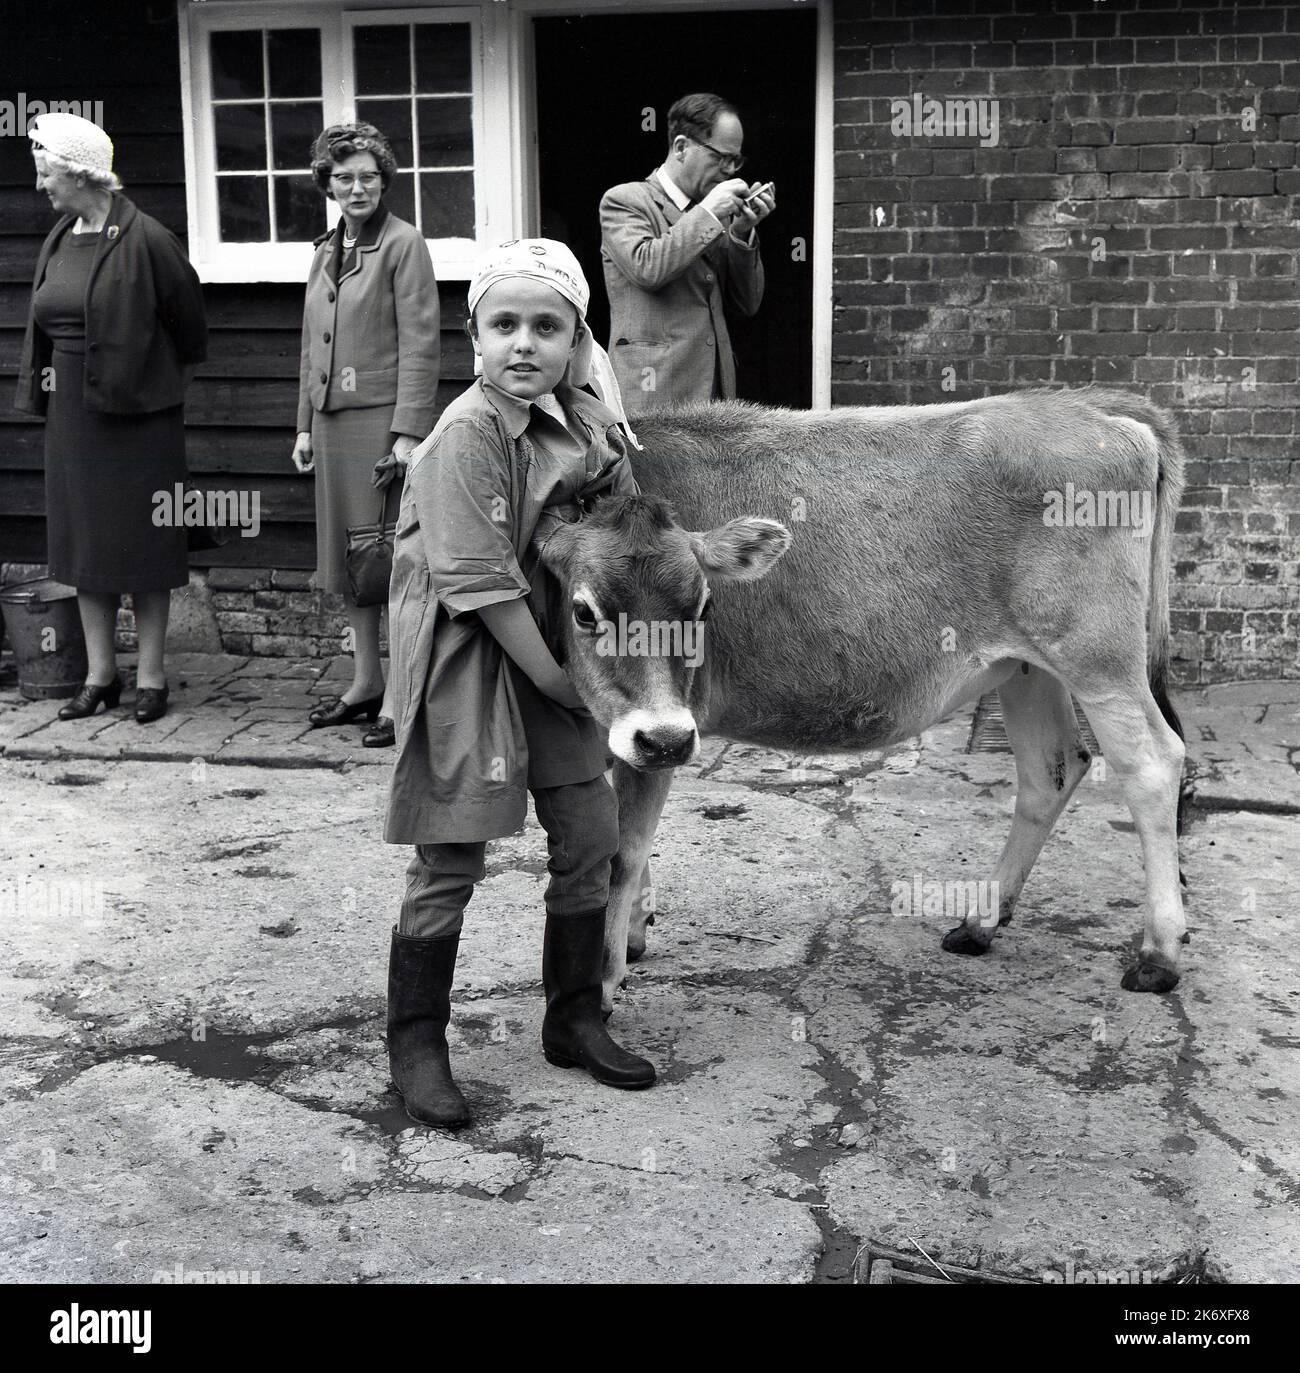 1964, outside in a farmyard, a young girl holding a cow's head, with adult visitors watching on, Wendover, Bucks, England, UK. The girl is a pupil at The Farmhouse School, established by Quaker, Isobel Fry around 1900 with children aged 8 to 18 years old. All the pupils had to rise early each day, to look after the animals and undertake general farm duties before breakfast. Traditional school lessons would then take place. Fry believed that learning about other subjects, such as science, nature, accounting came through work activities on the farm. Stock Photo